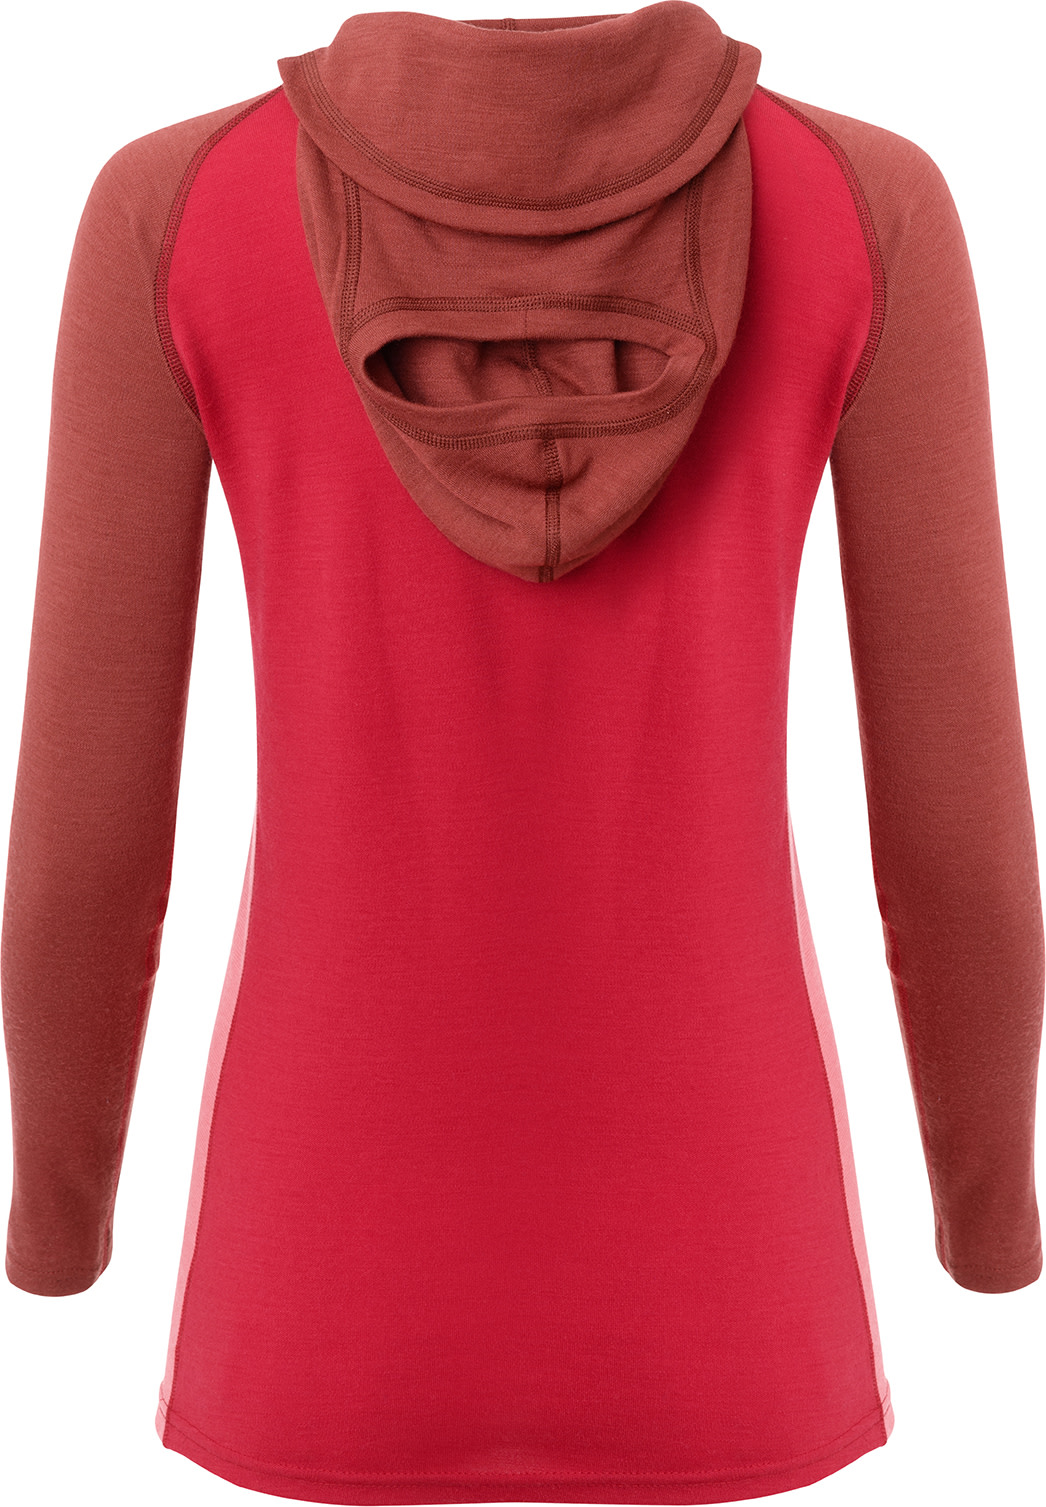 Women's WarmWool Hoodsweater V2 Spiced Apple/Jester Red/Spiced Coral